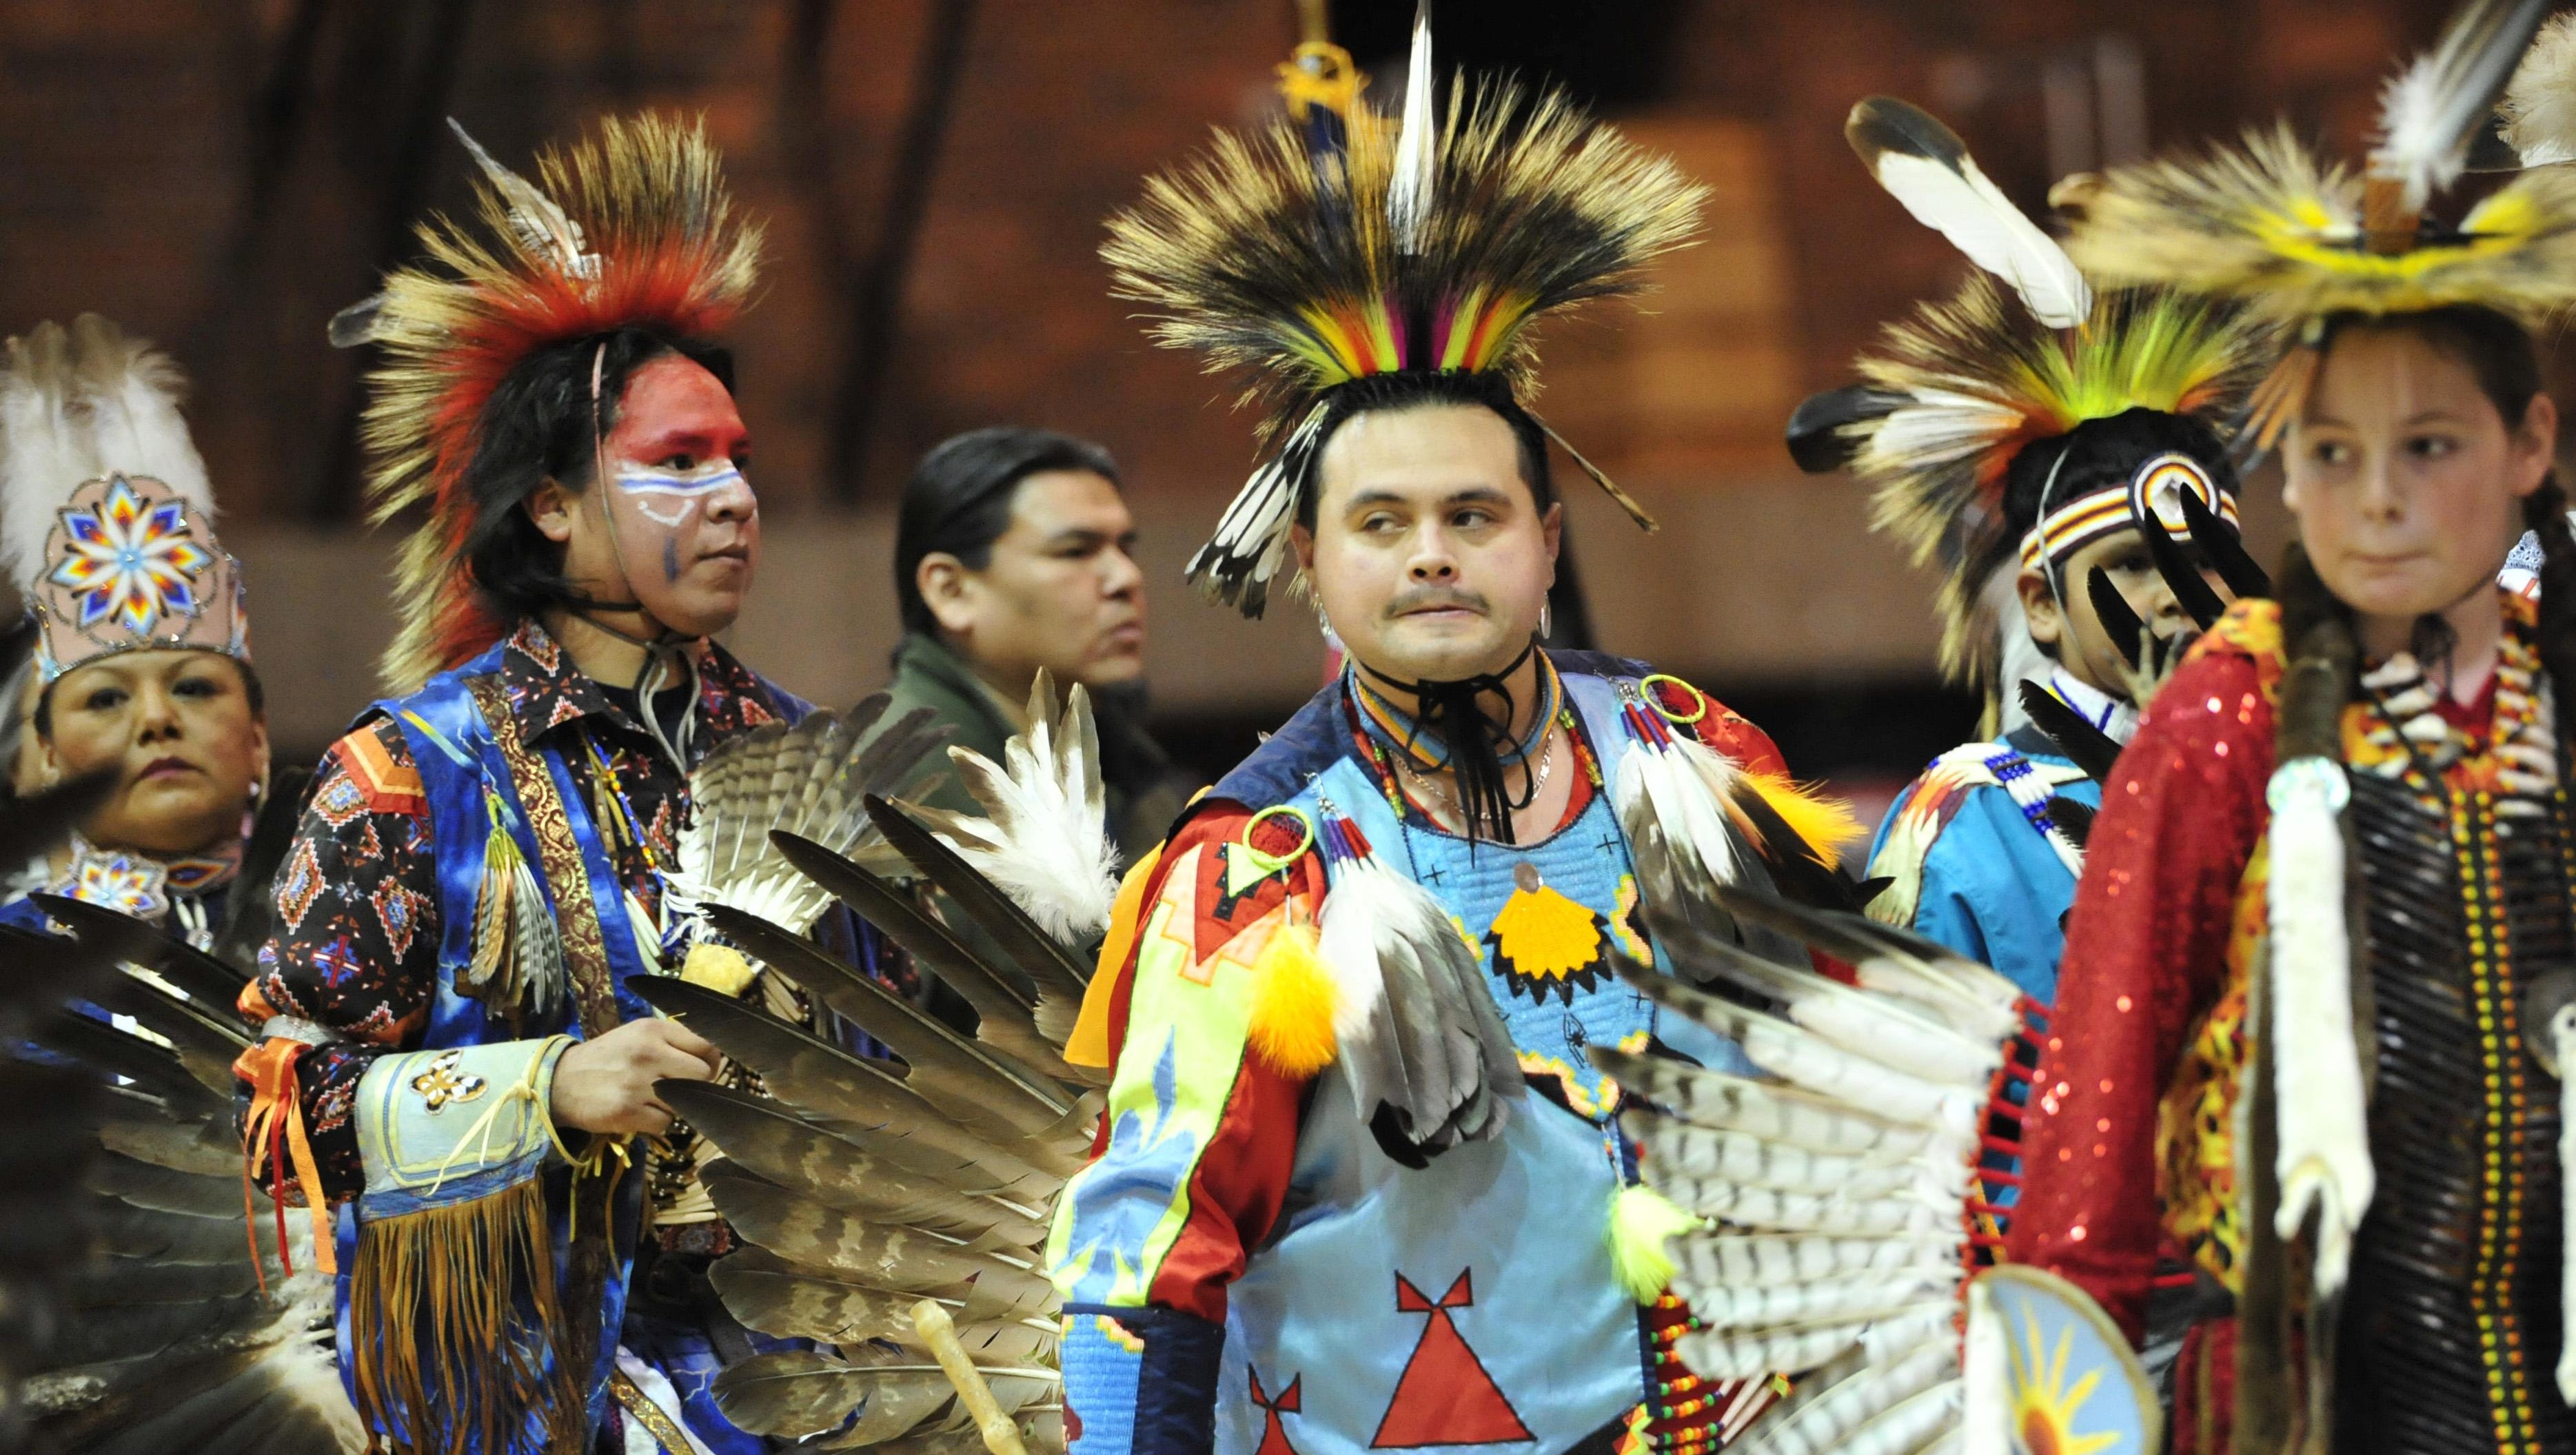 Experience native culture at powwow March 11